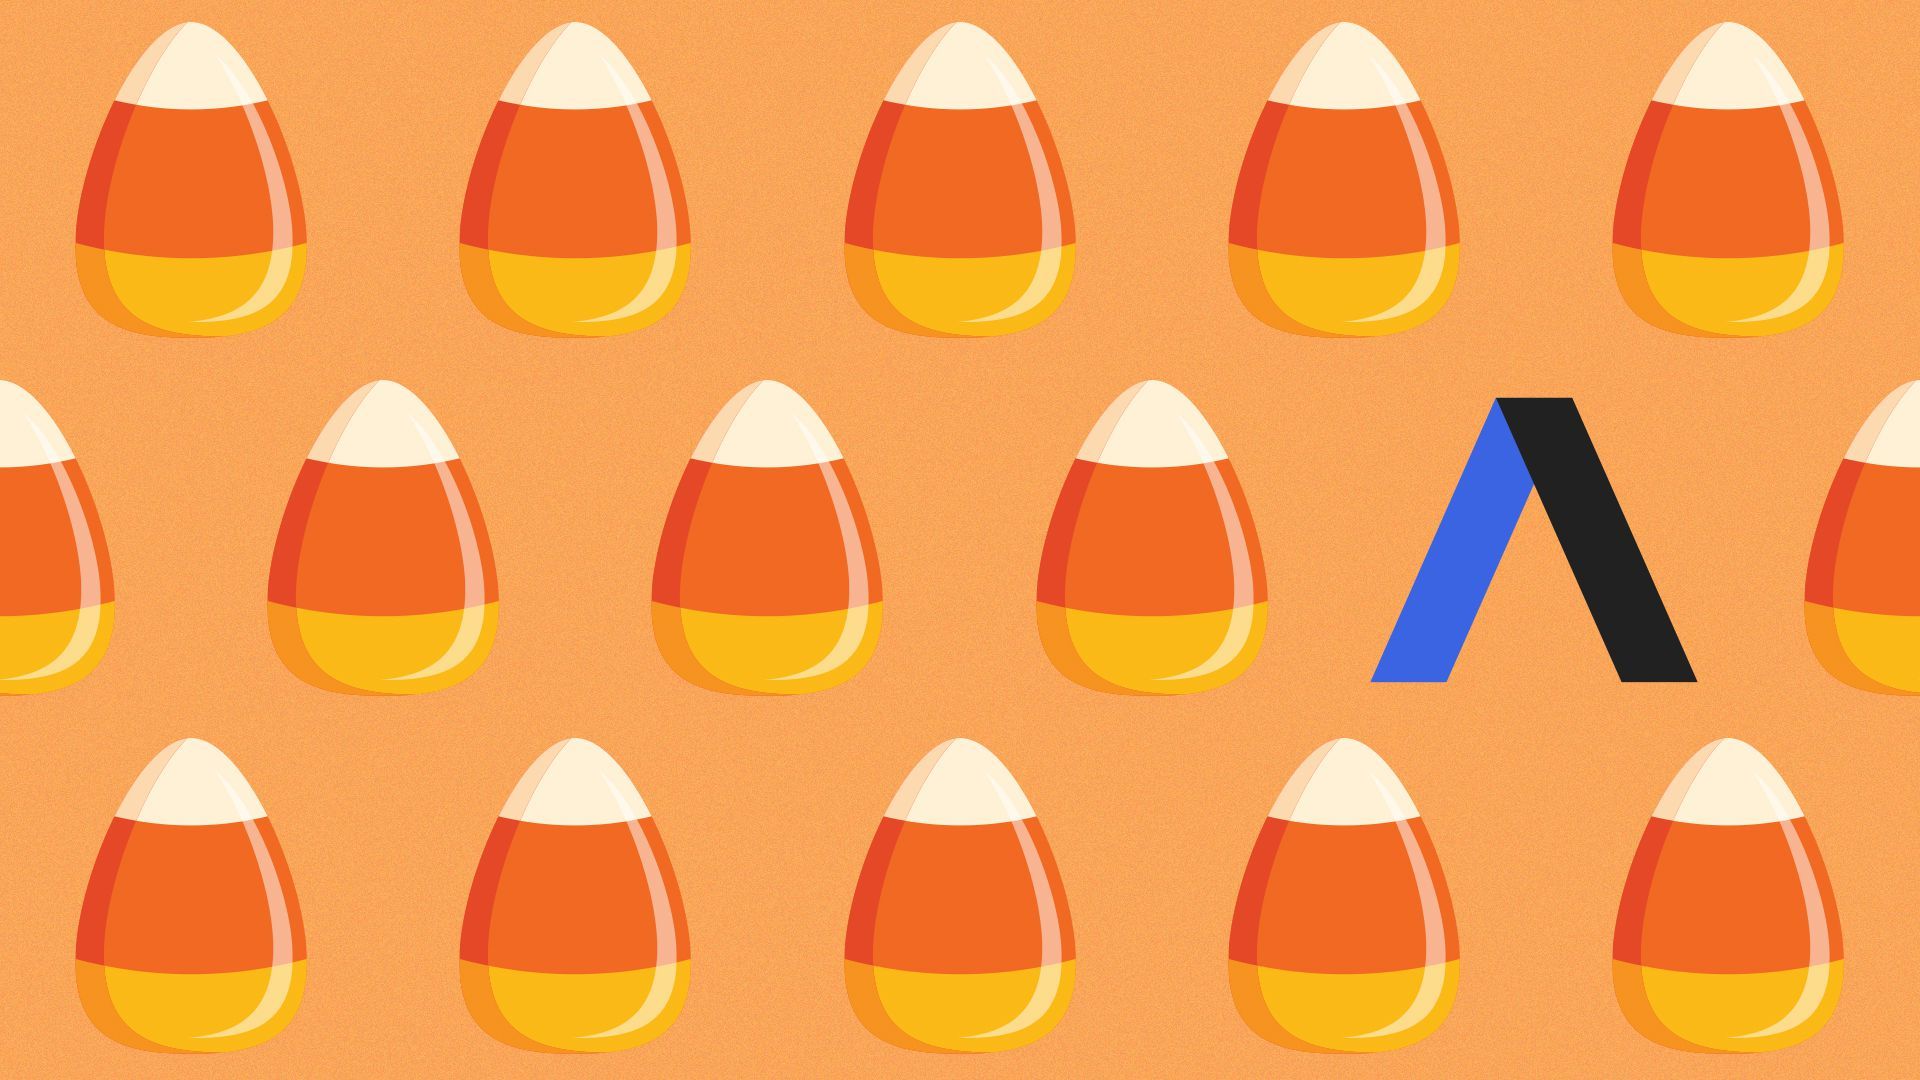 Illustration of candy corn with the Axios logo.